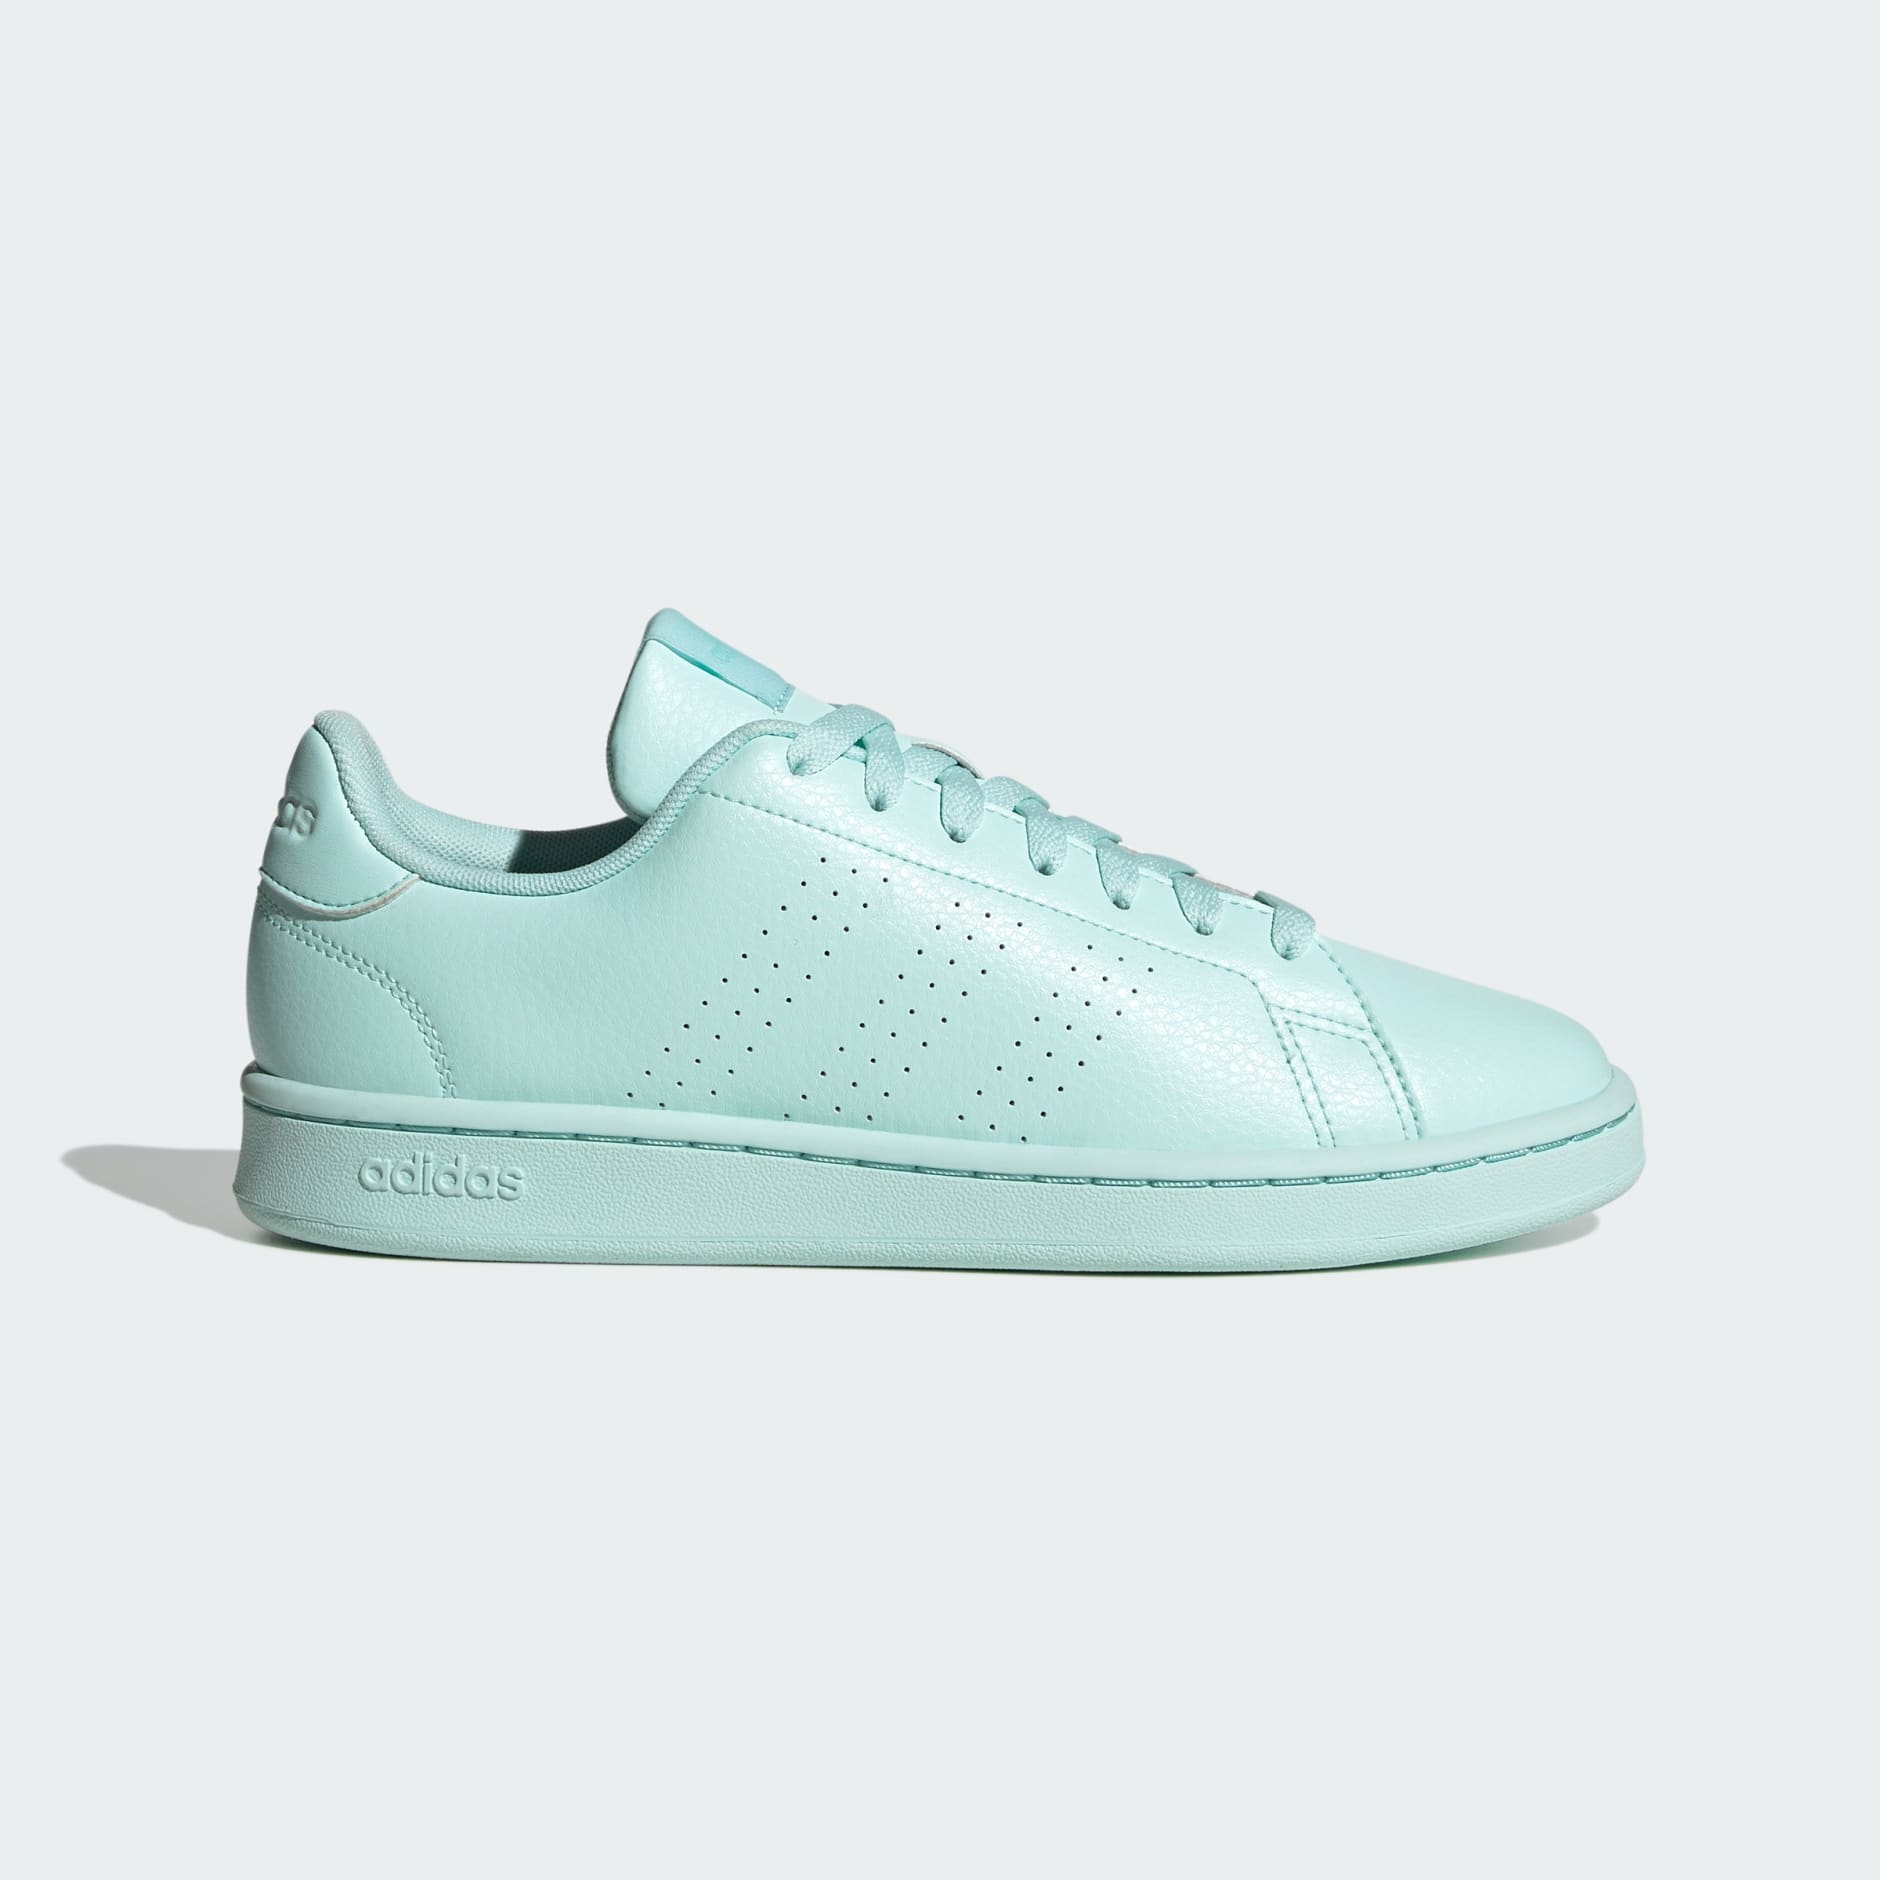 Shoes - Advantage Shoes - Turquoise | adidas South Africa